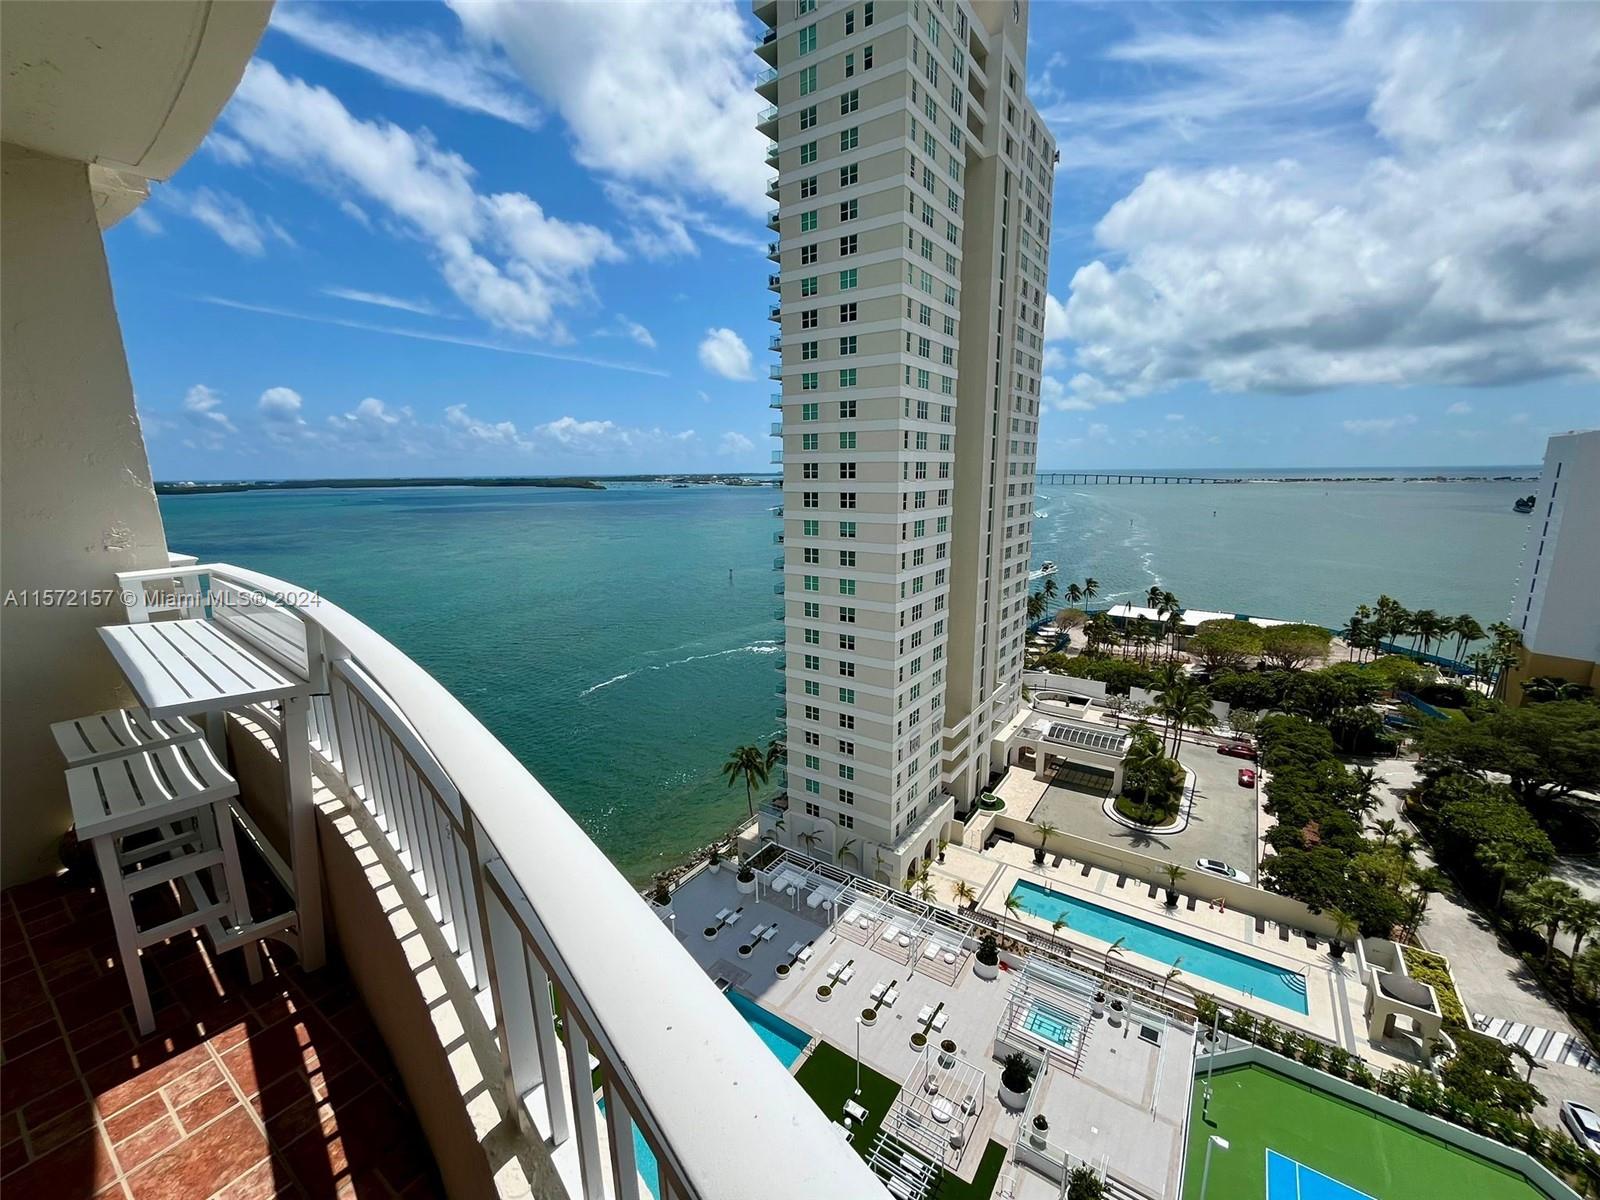 Exquisite 19th-floor residence boasting captivating waterfront panoramas from its inviting balcony on exclusive Brickell Key Island. Enjoy proximity to top-tier restaurants and cafes, offering privacy and sophistication. Features include wood floors, a generous bedroom, and a chic bathroom. Embrace luxurious living in the Financing district, near Miami Airport, trendy establishments, and shops. Recently renovated pool and amenities; please contact the condo association for details. 1-year lease, no short terms.